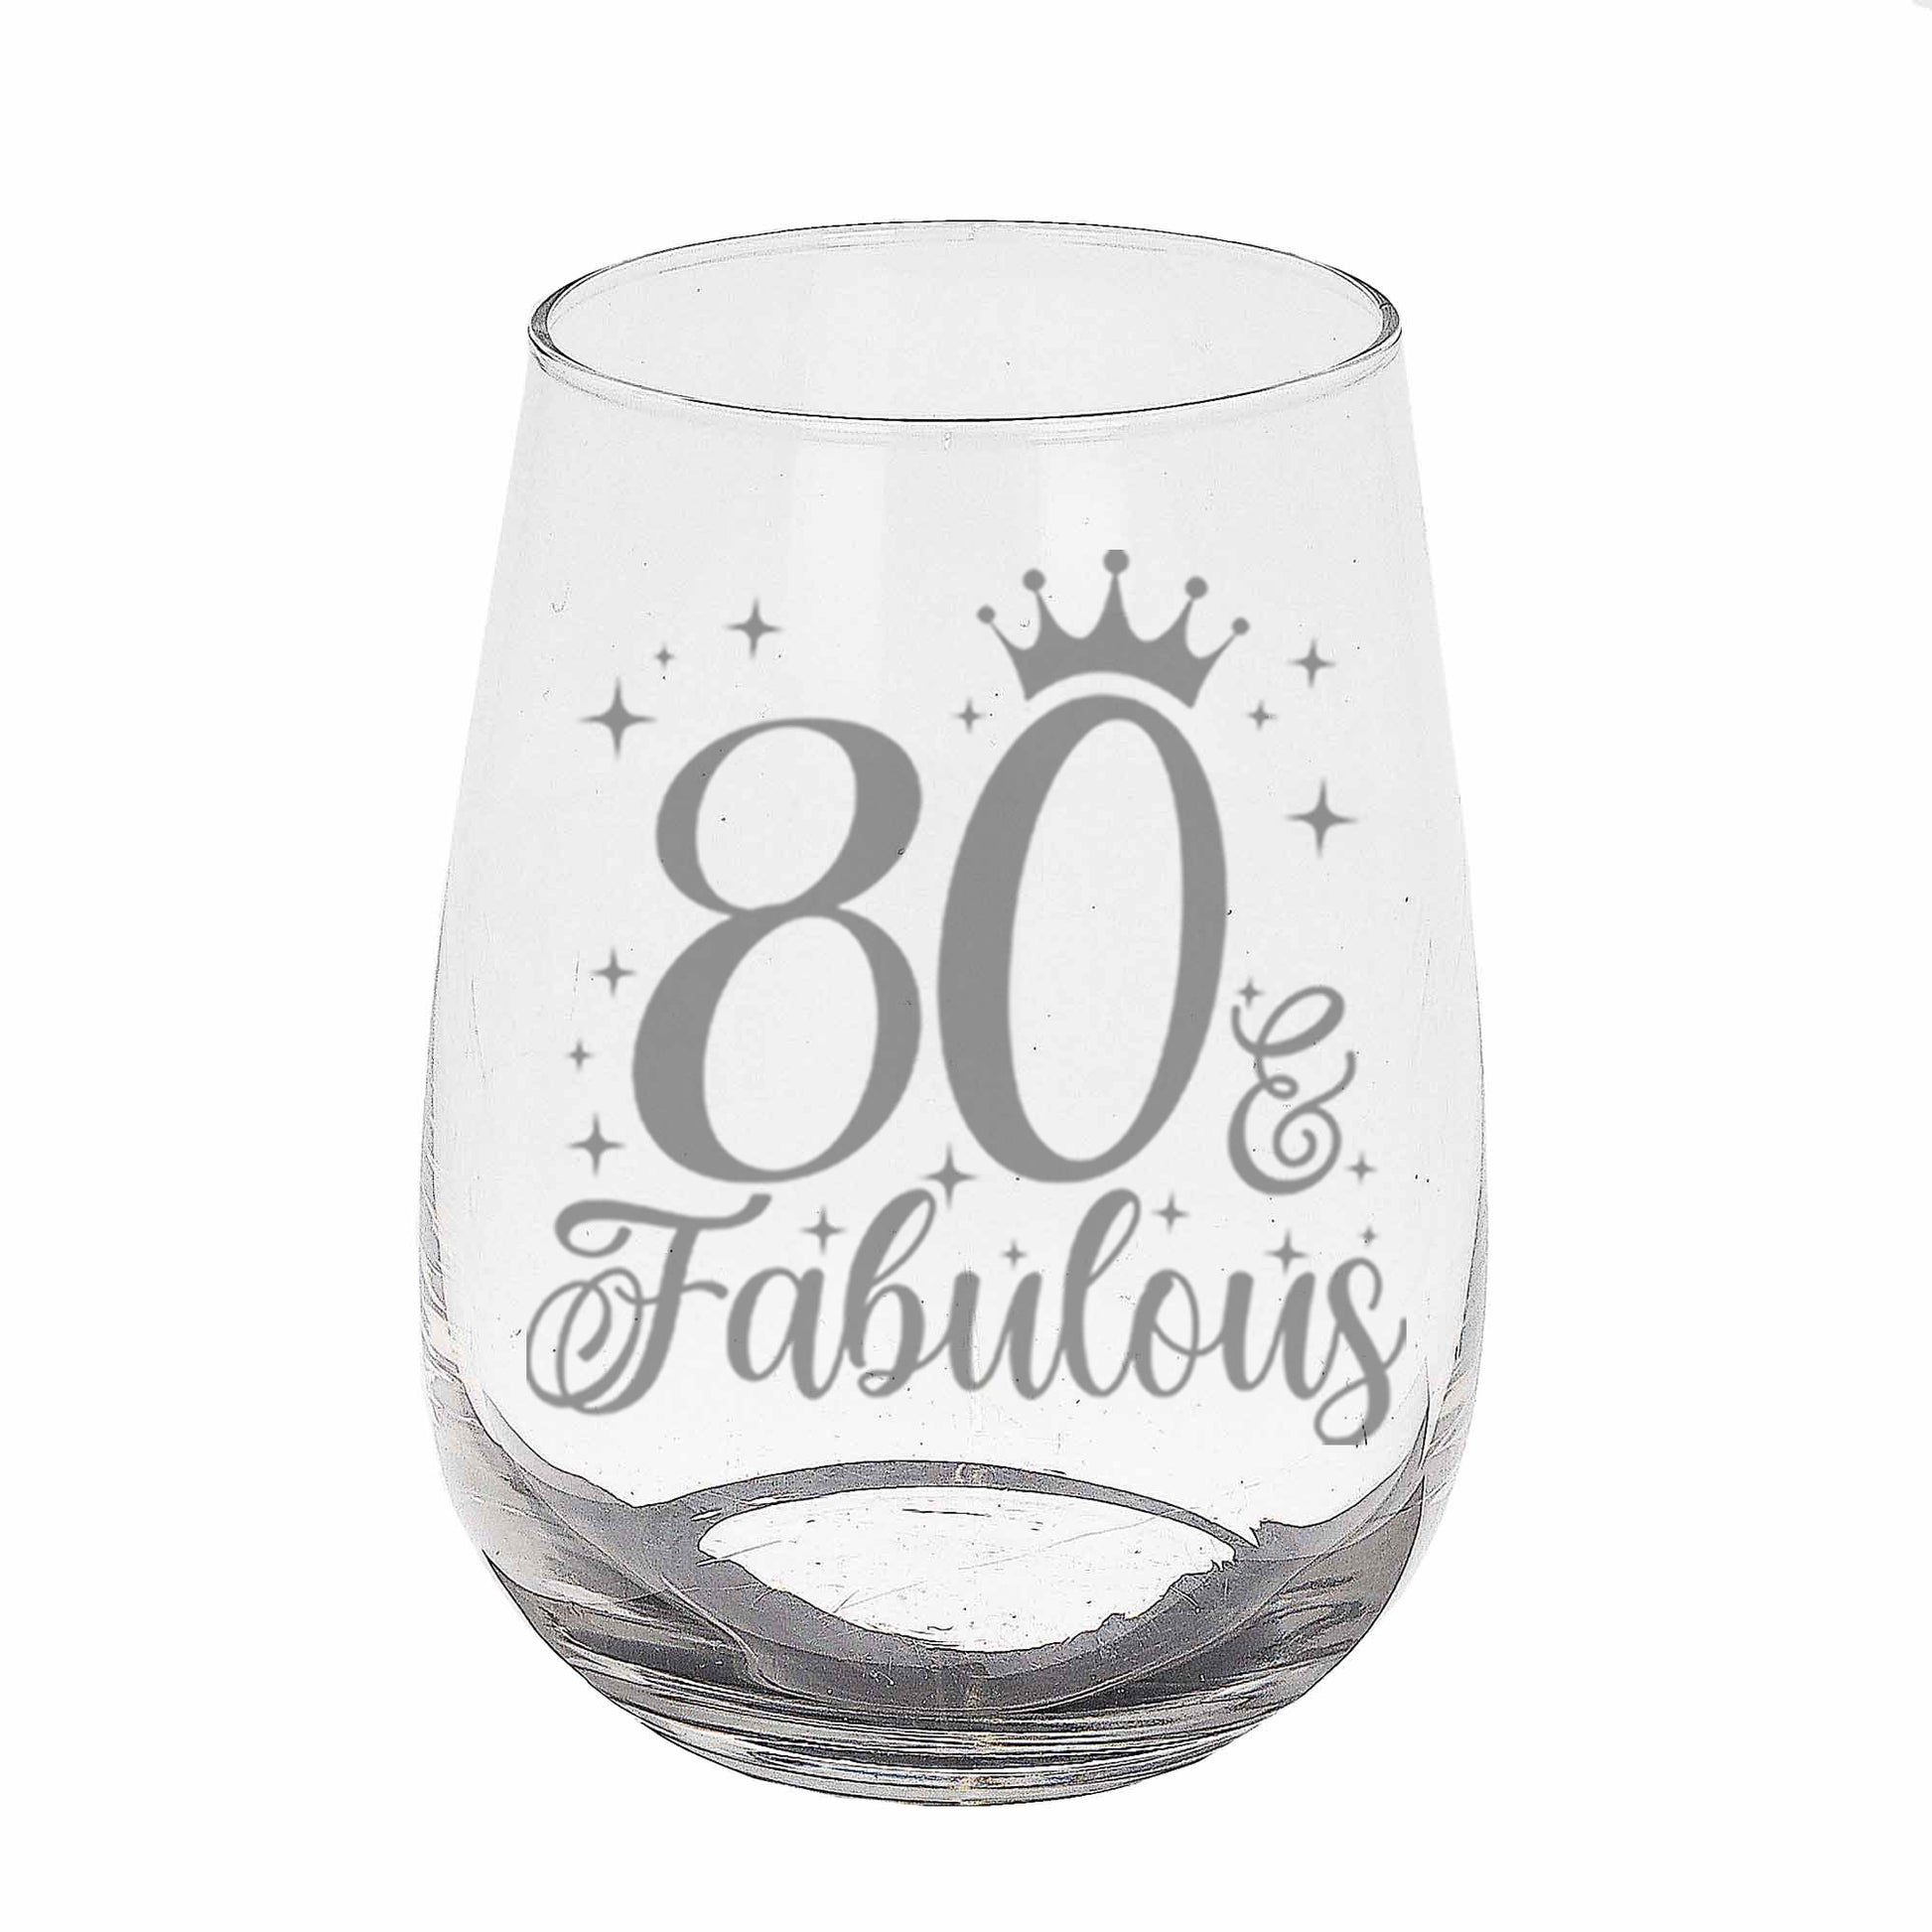 80 & Fabulous Engraved Stemless Gin Glass and/or Coaster Set  - Always Looking Good - Stemless Gin Glass On Its Own  